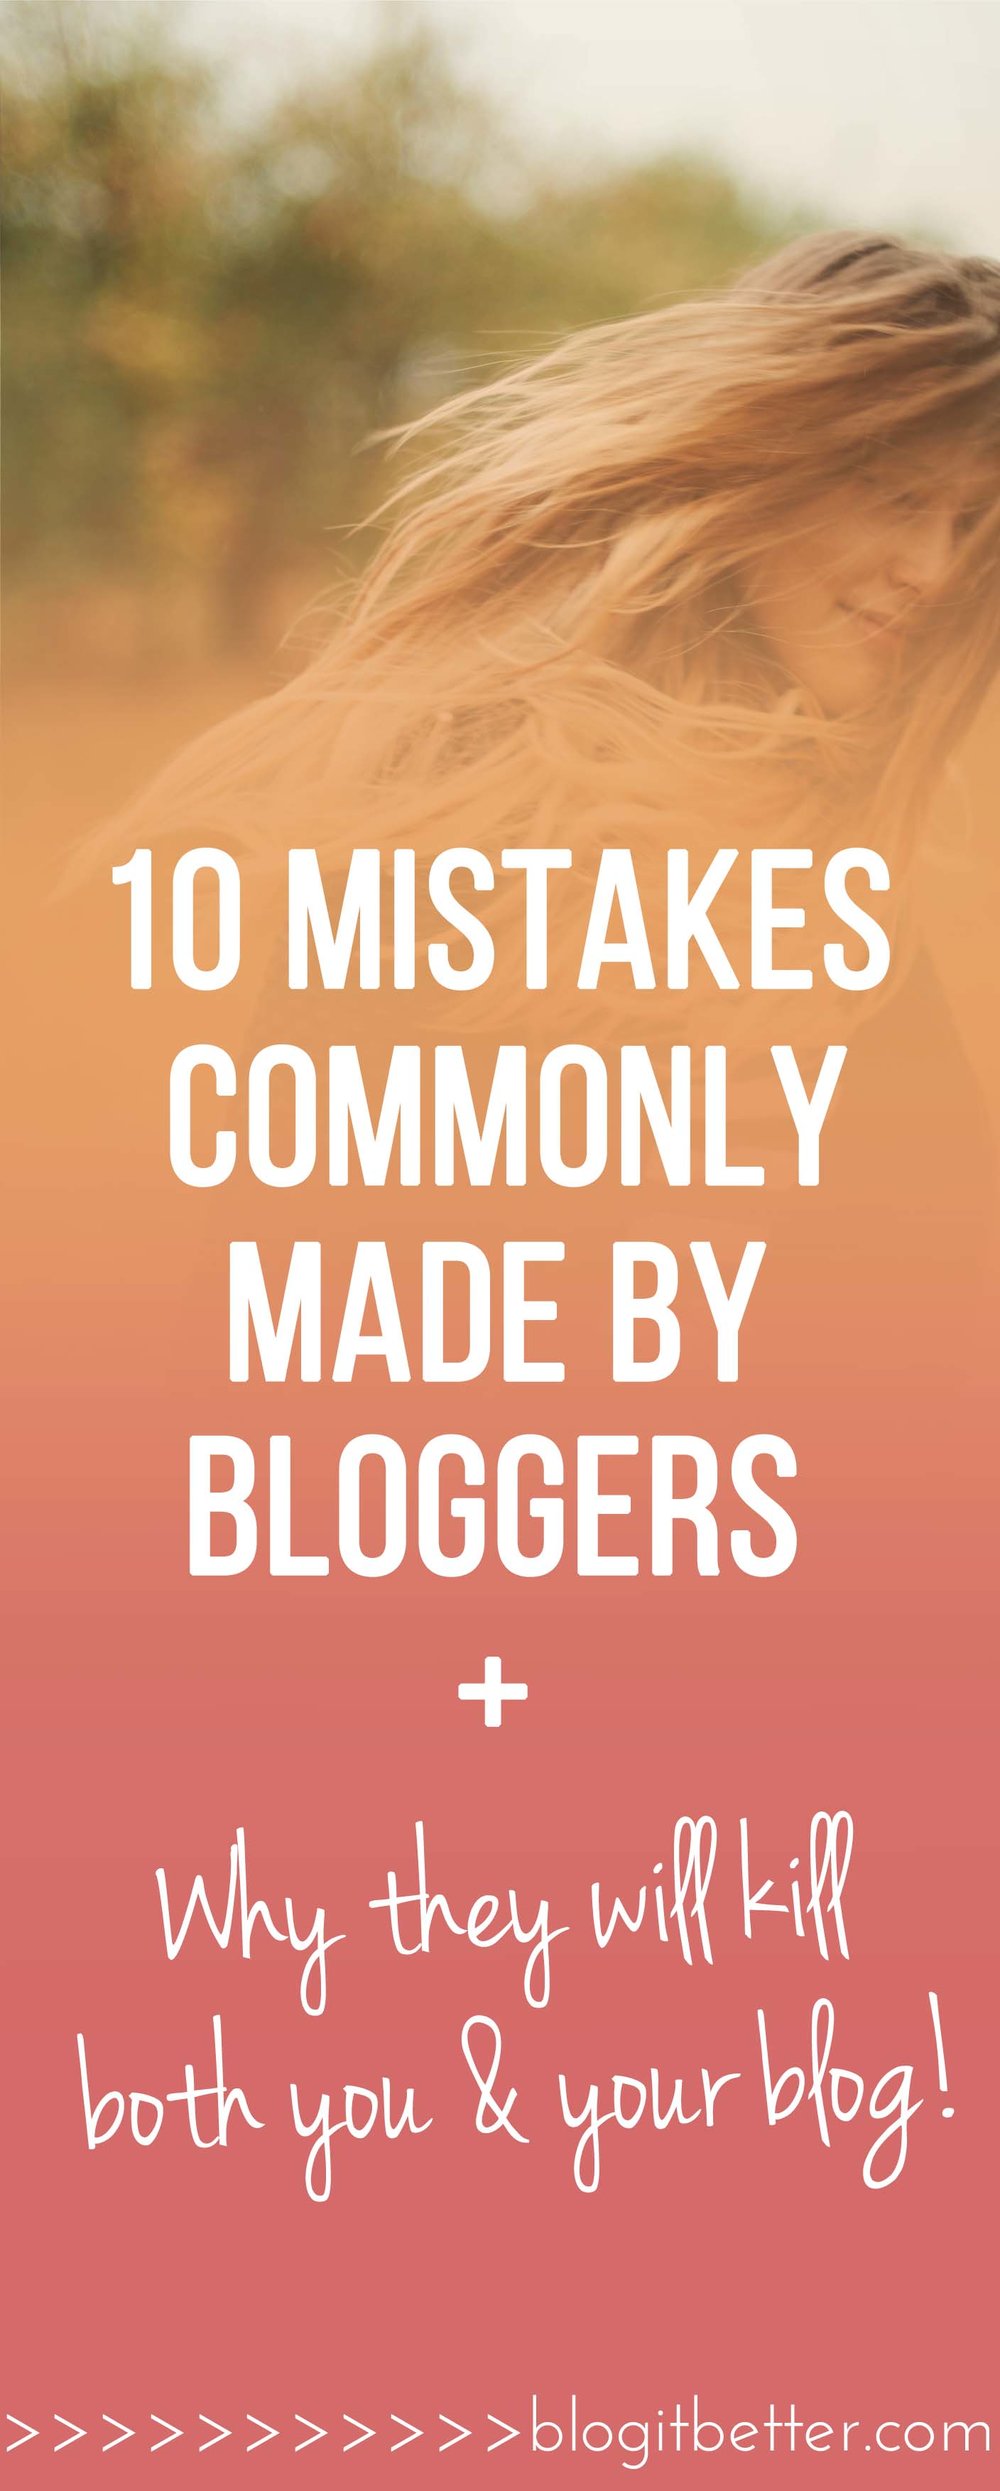 10 mistakes commonly made by bloggers, and why they will kill both you and your blog